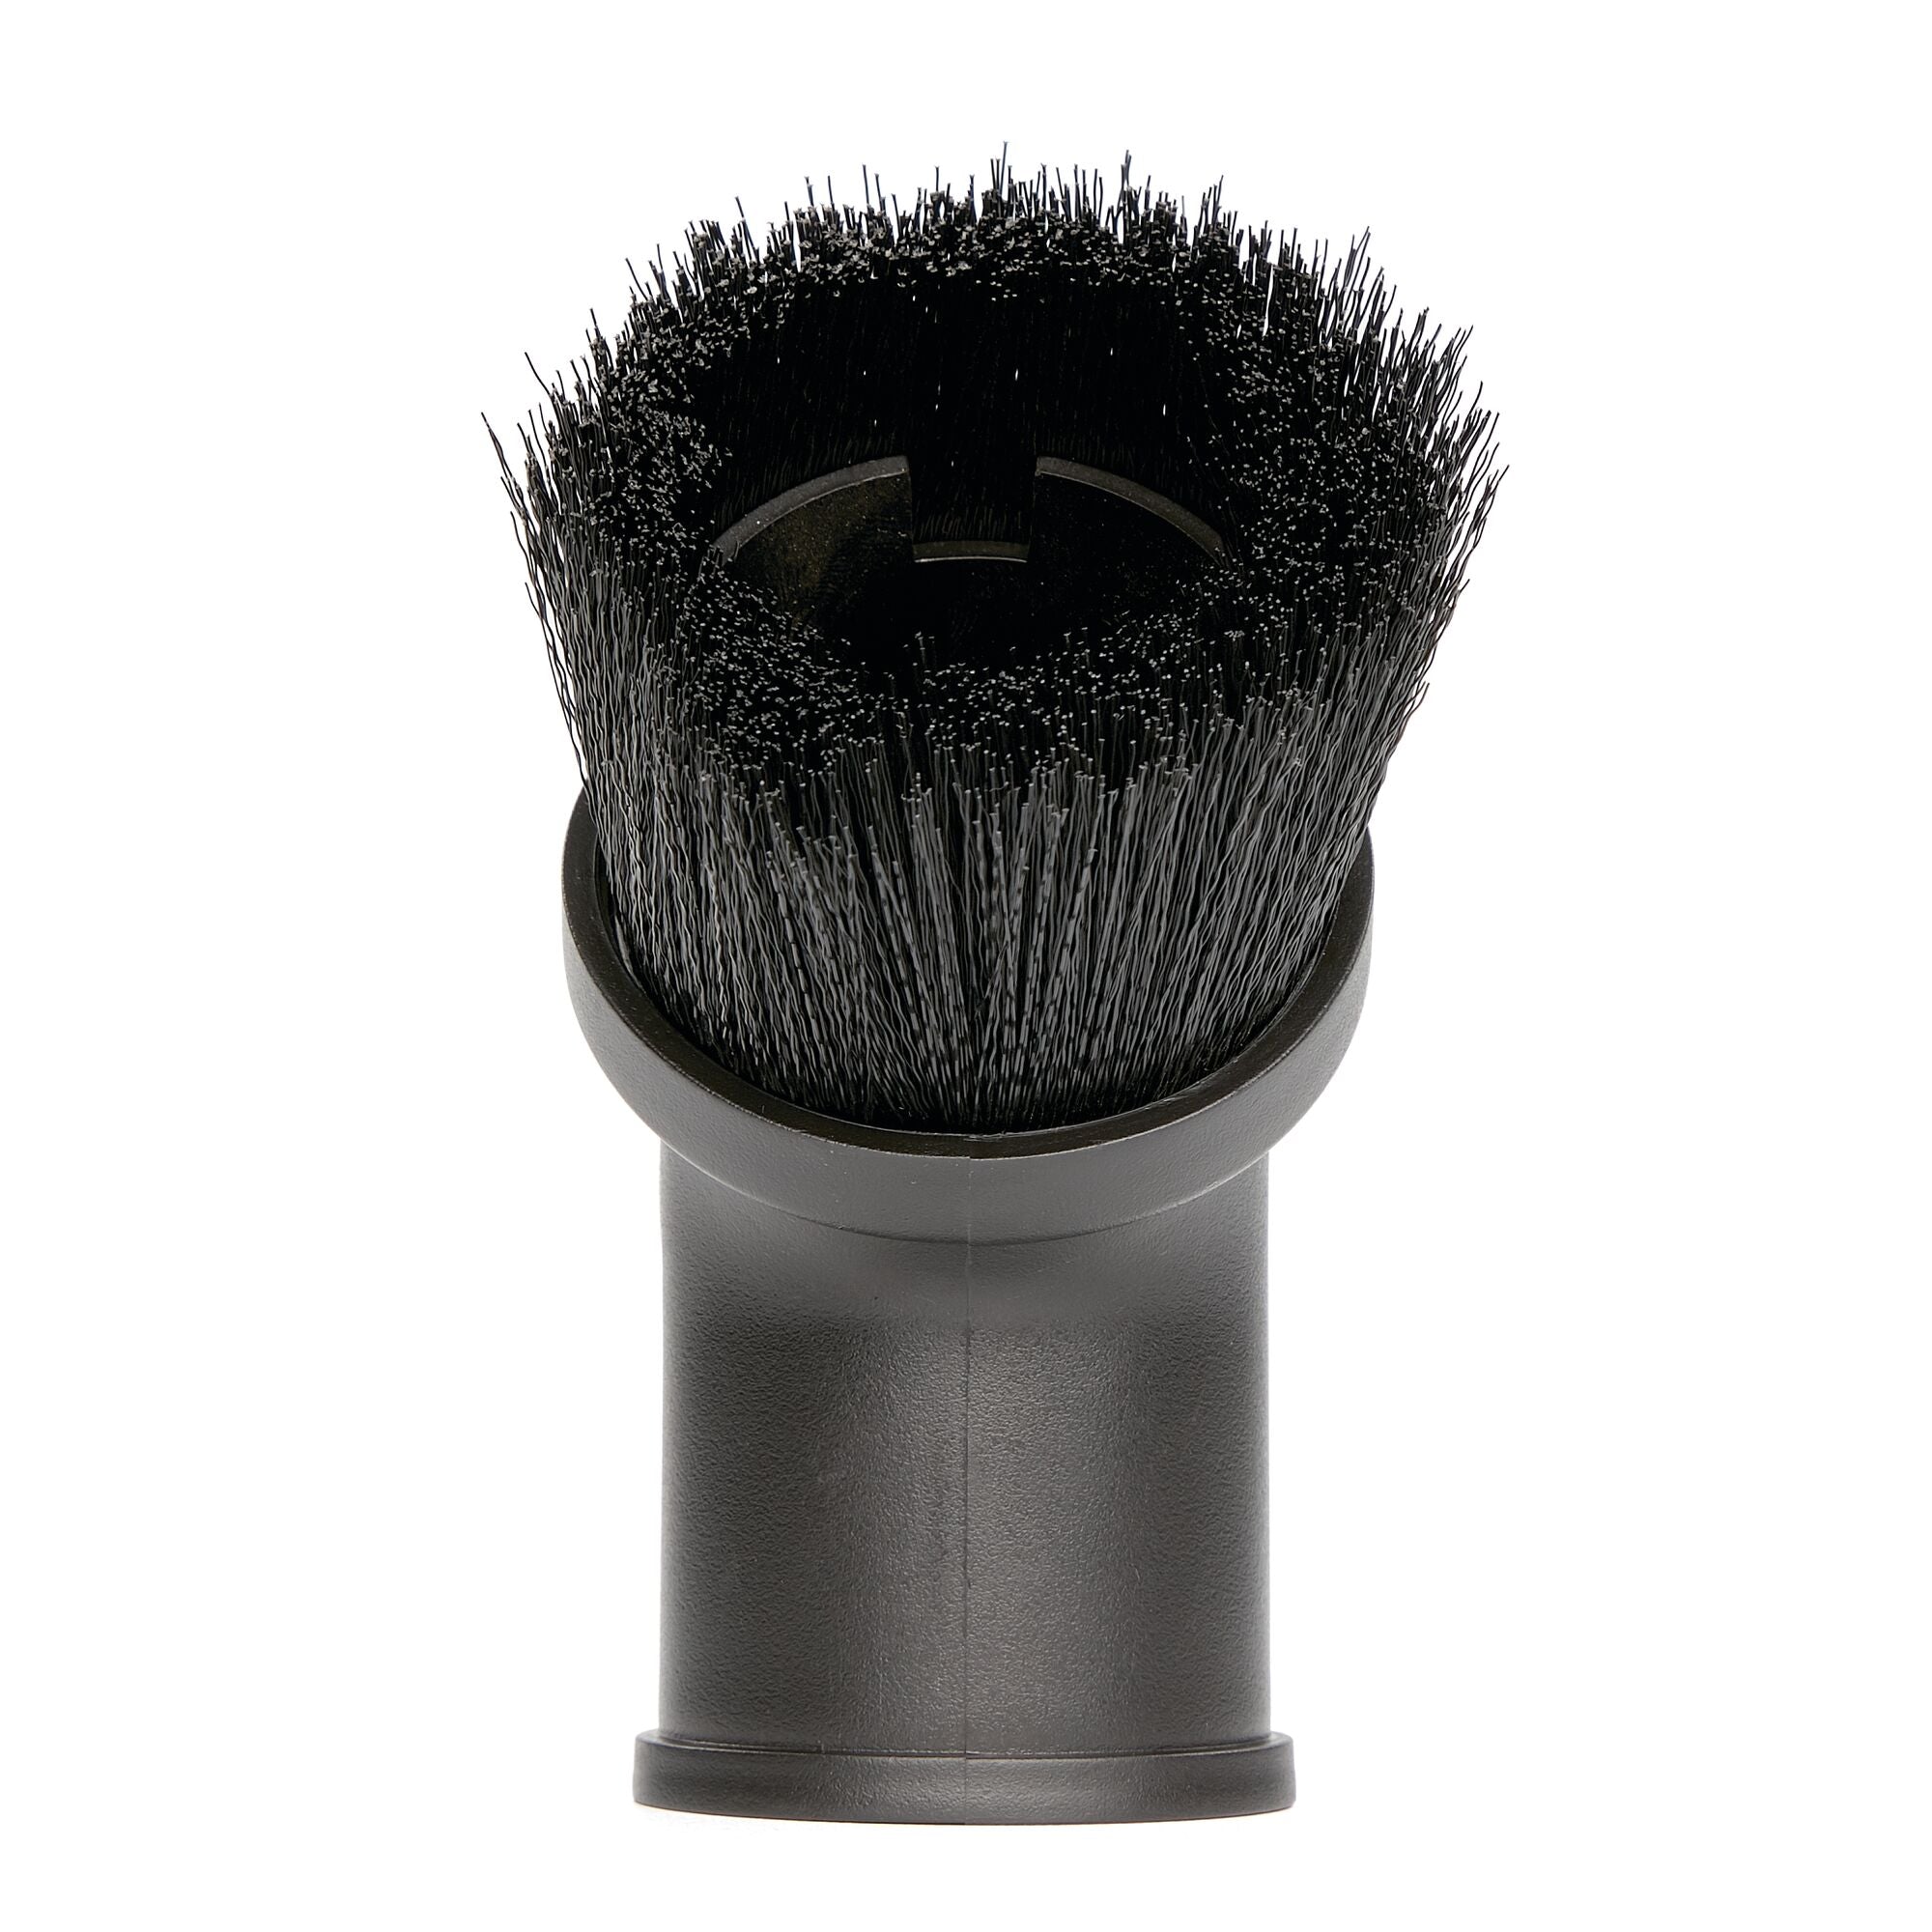 One and seven eighths inch Dusting Brush Wet or Dry Vacuum Attachment.